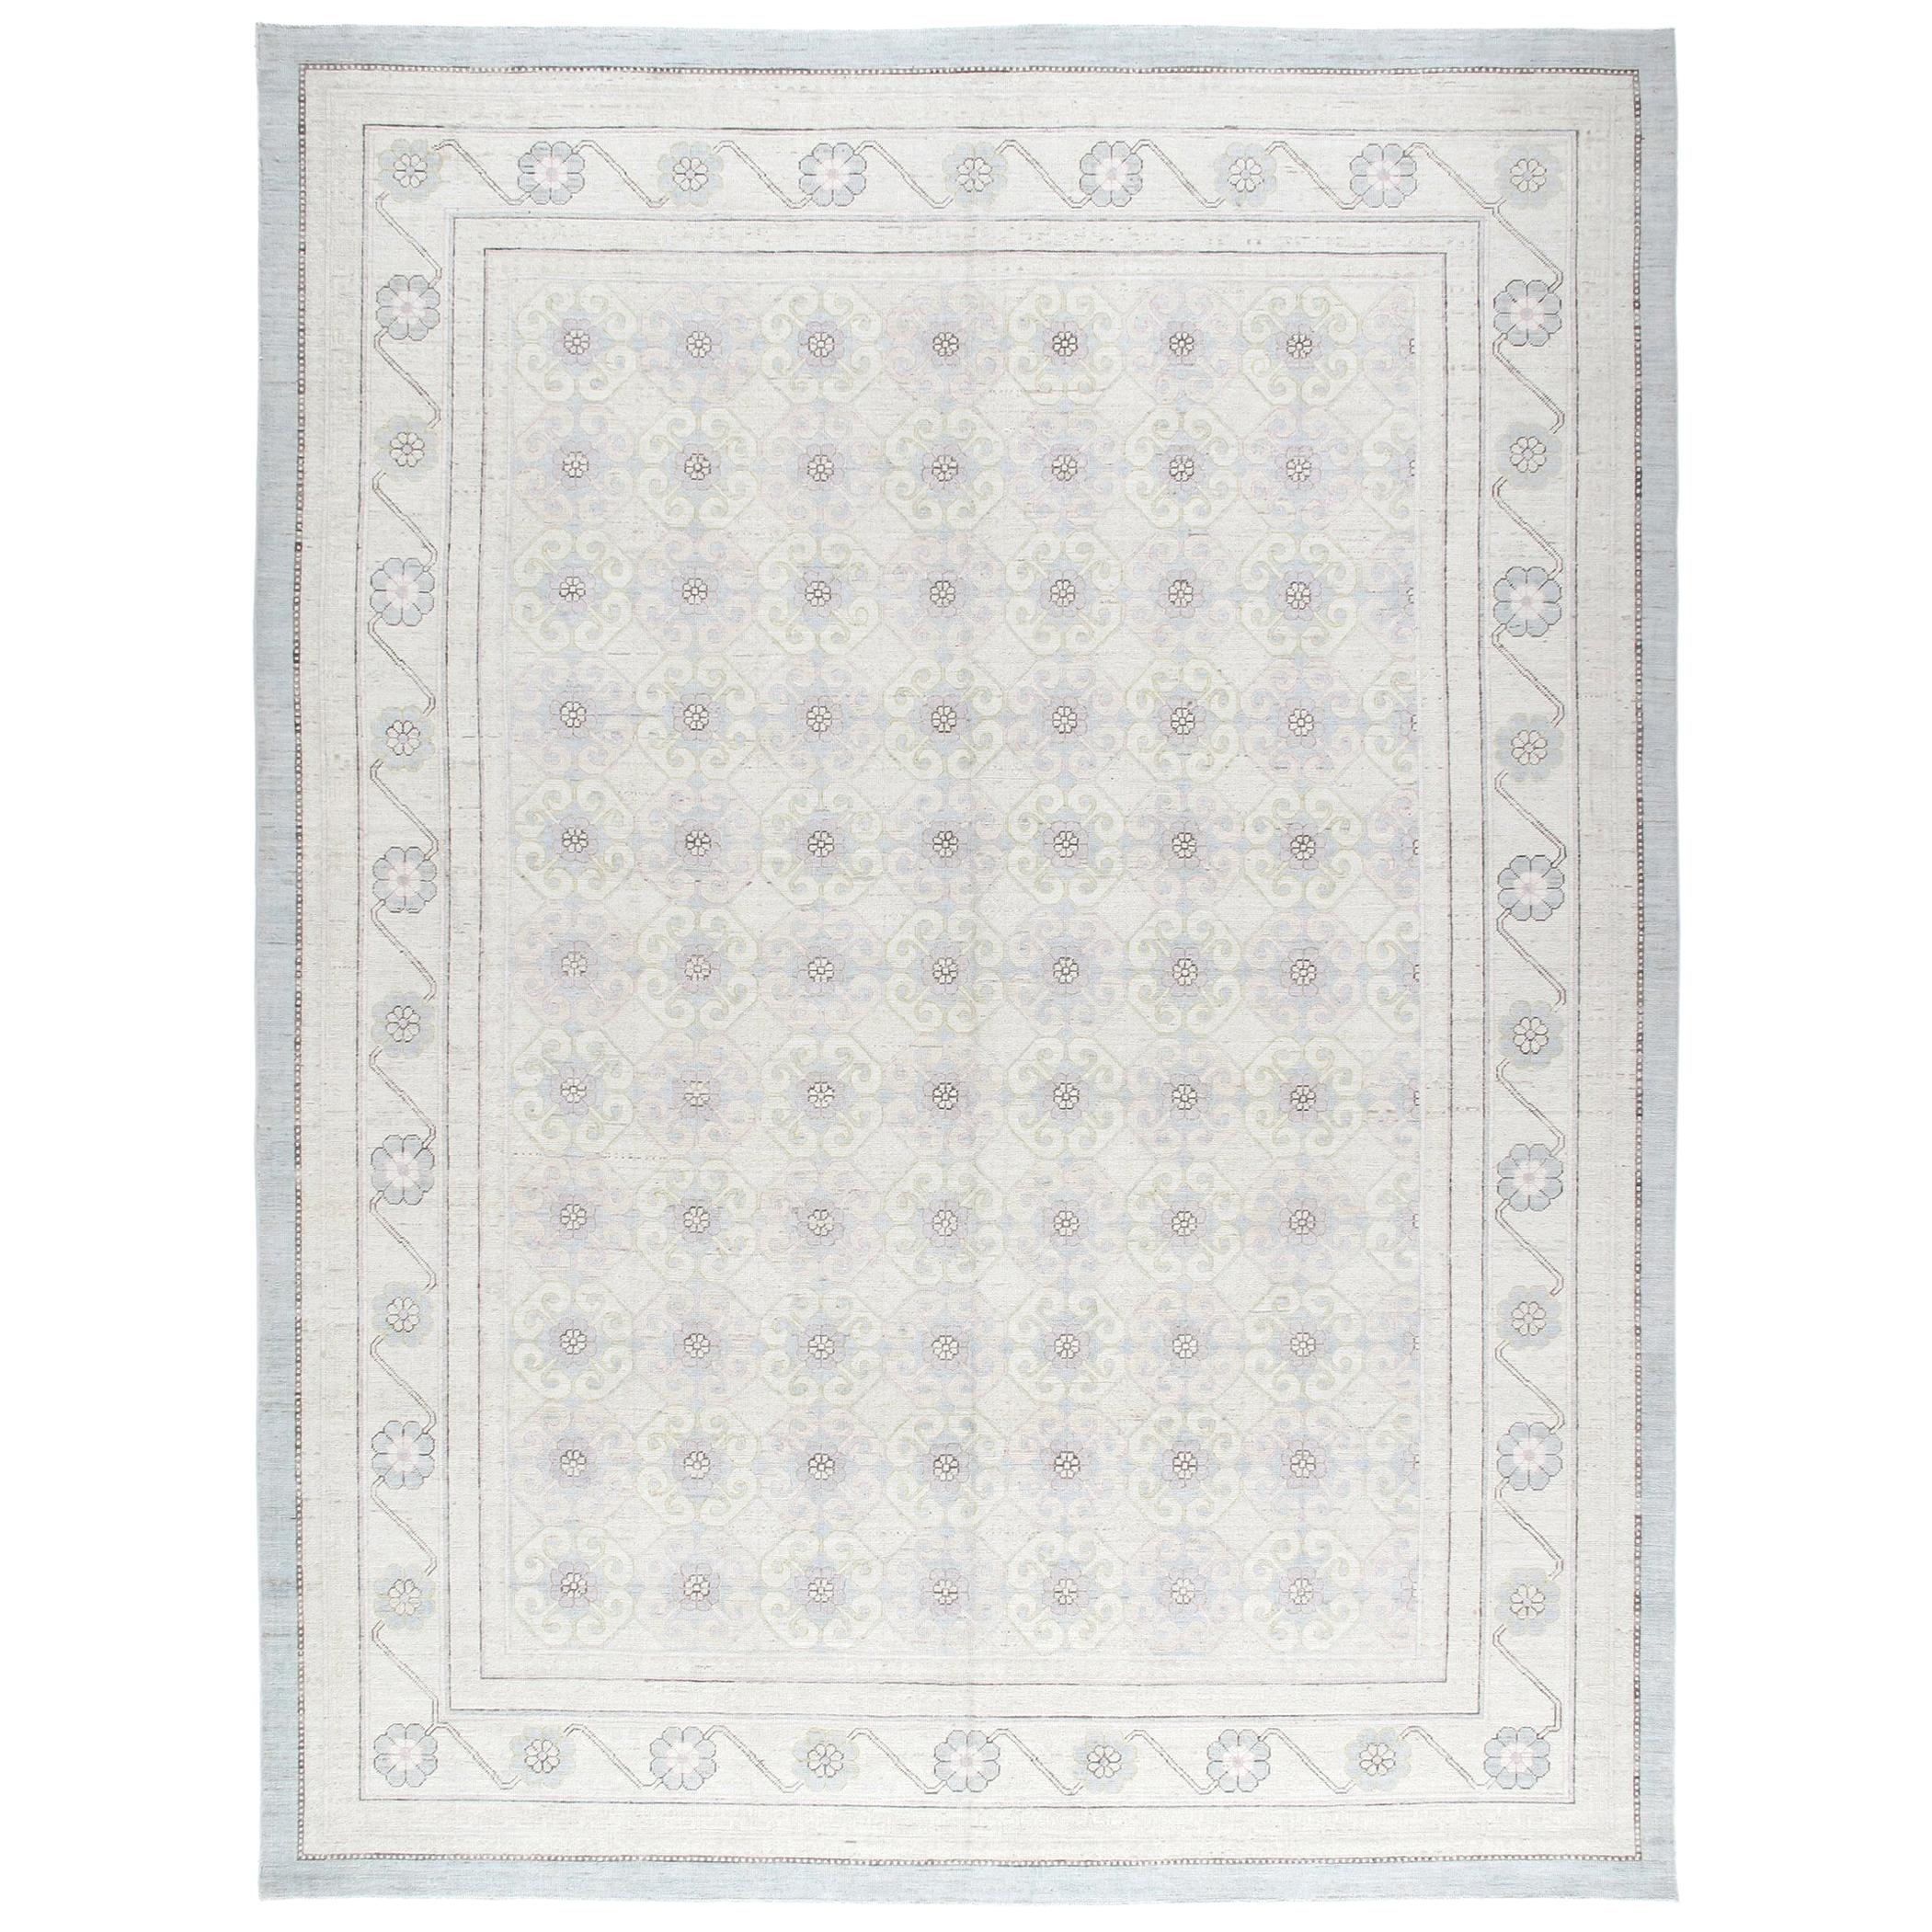 Khotan Hand Knotted Patina Rug in Beige and Blue Colors